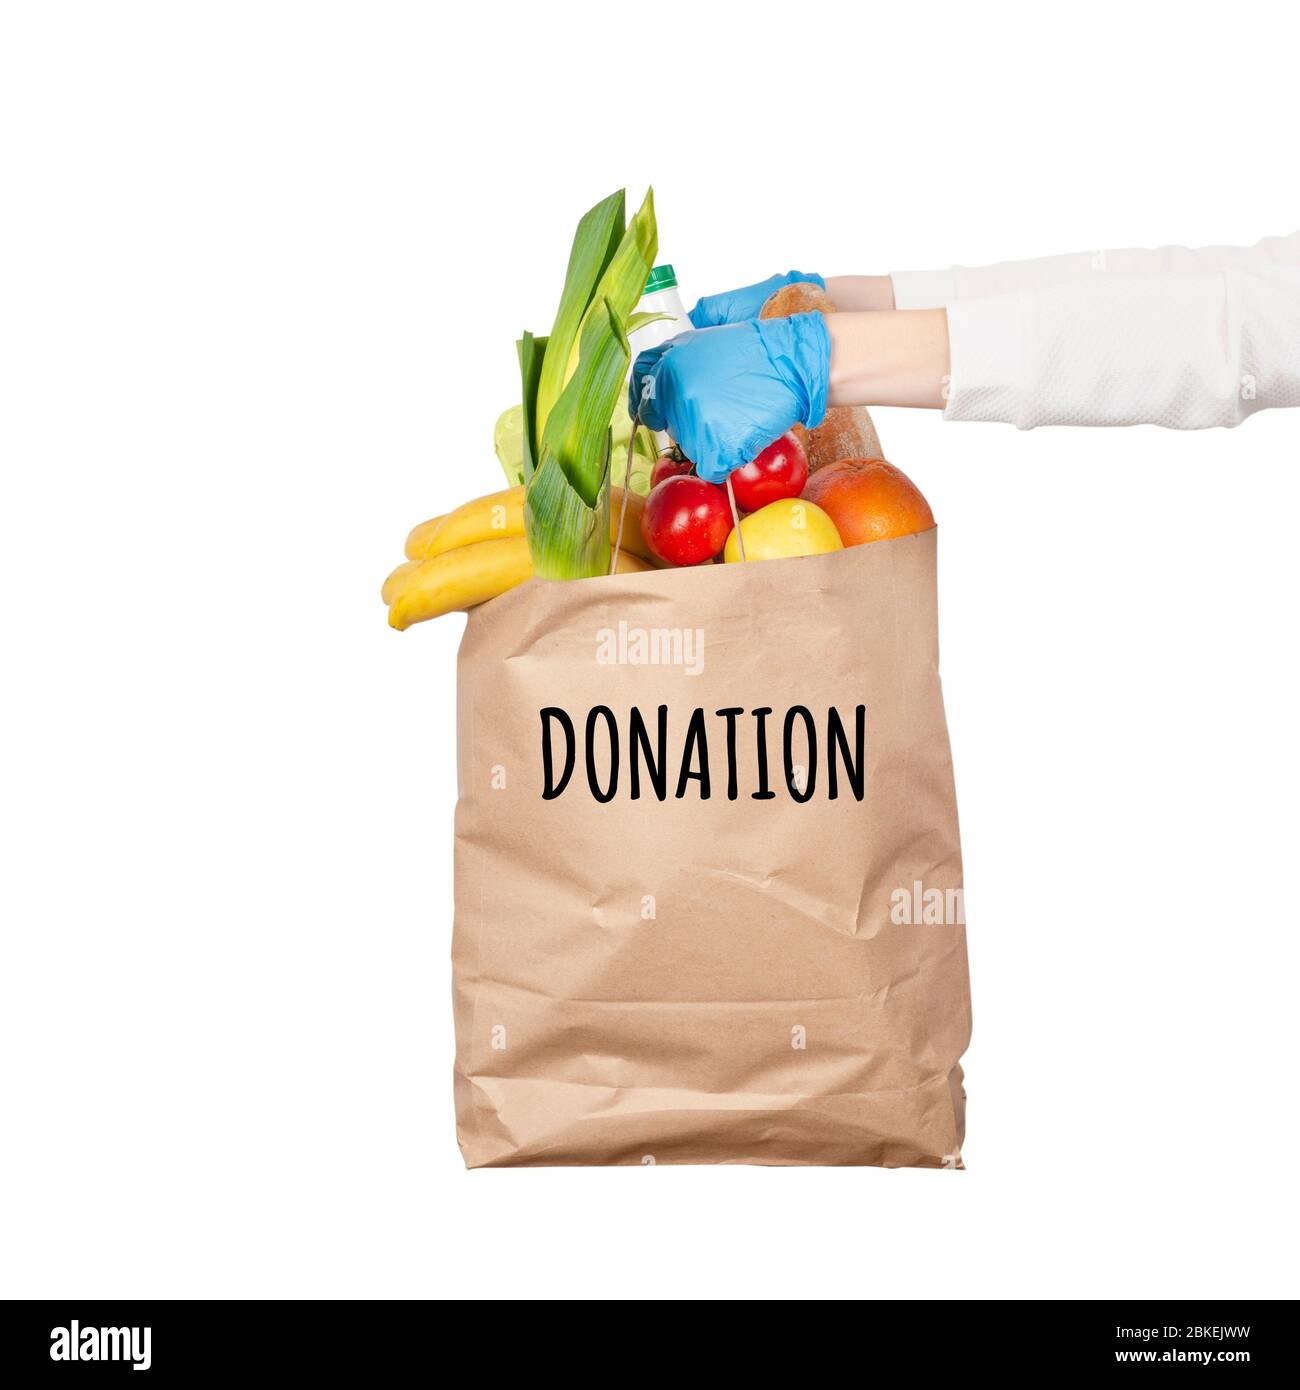 Safe food delivery or donation concept. Food delivery during coronavirus quarantine. Paper bag with different food ingredients such as fruits, vegetab Stock Photo